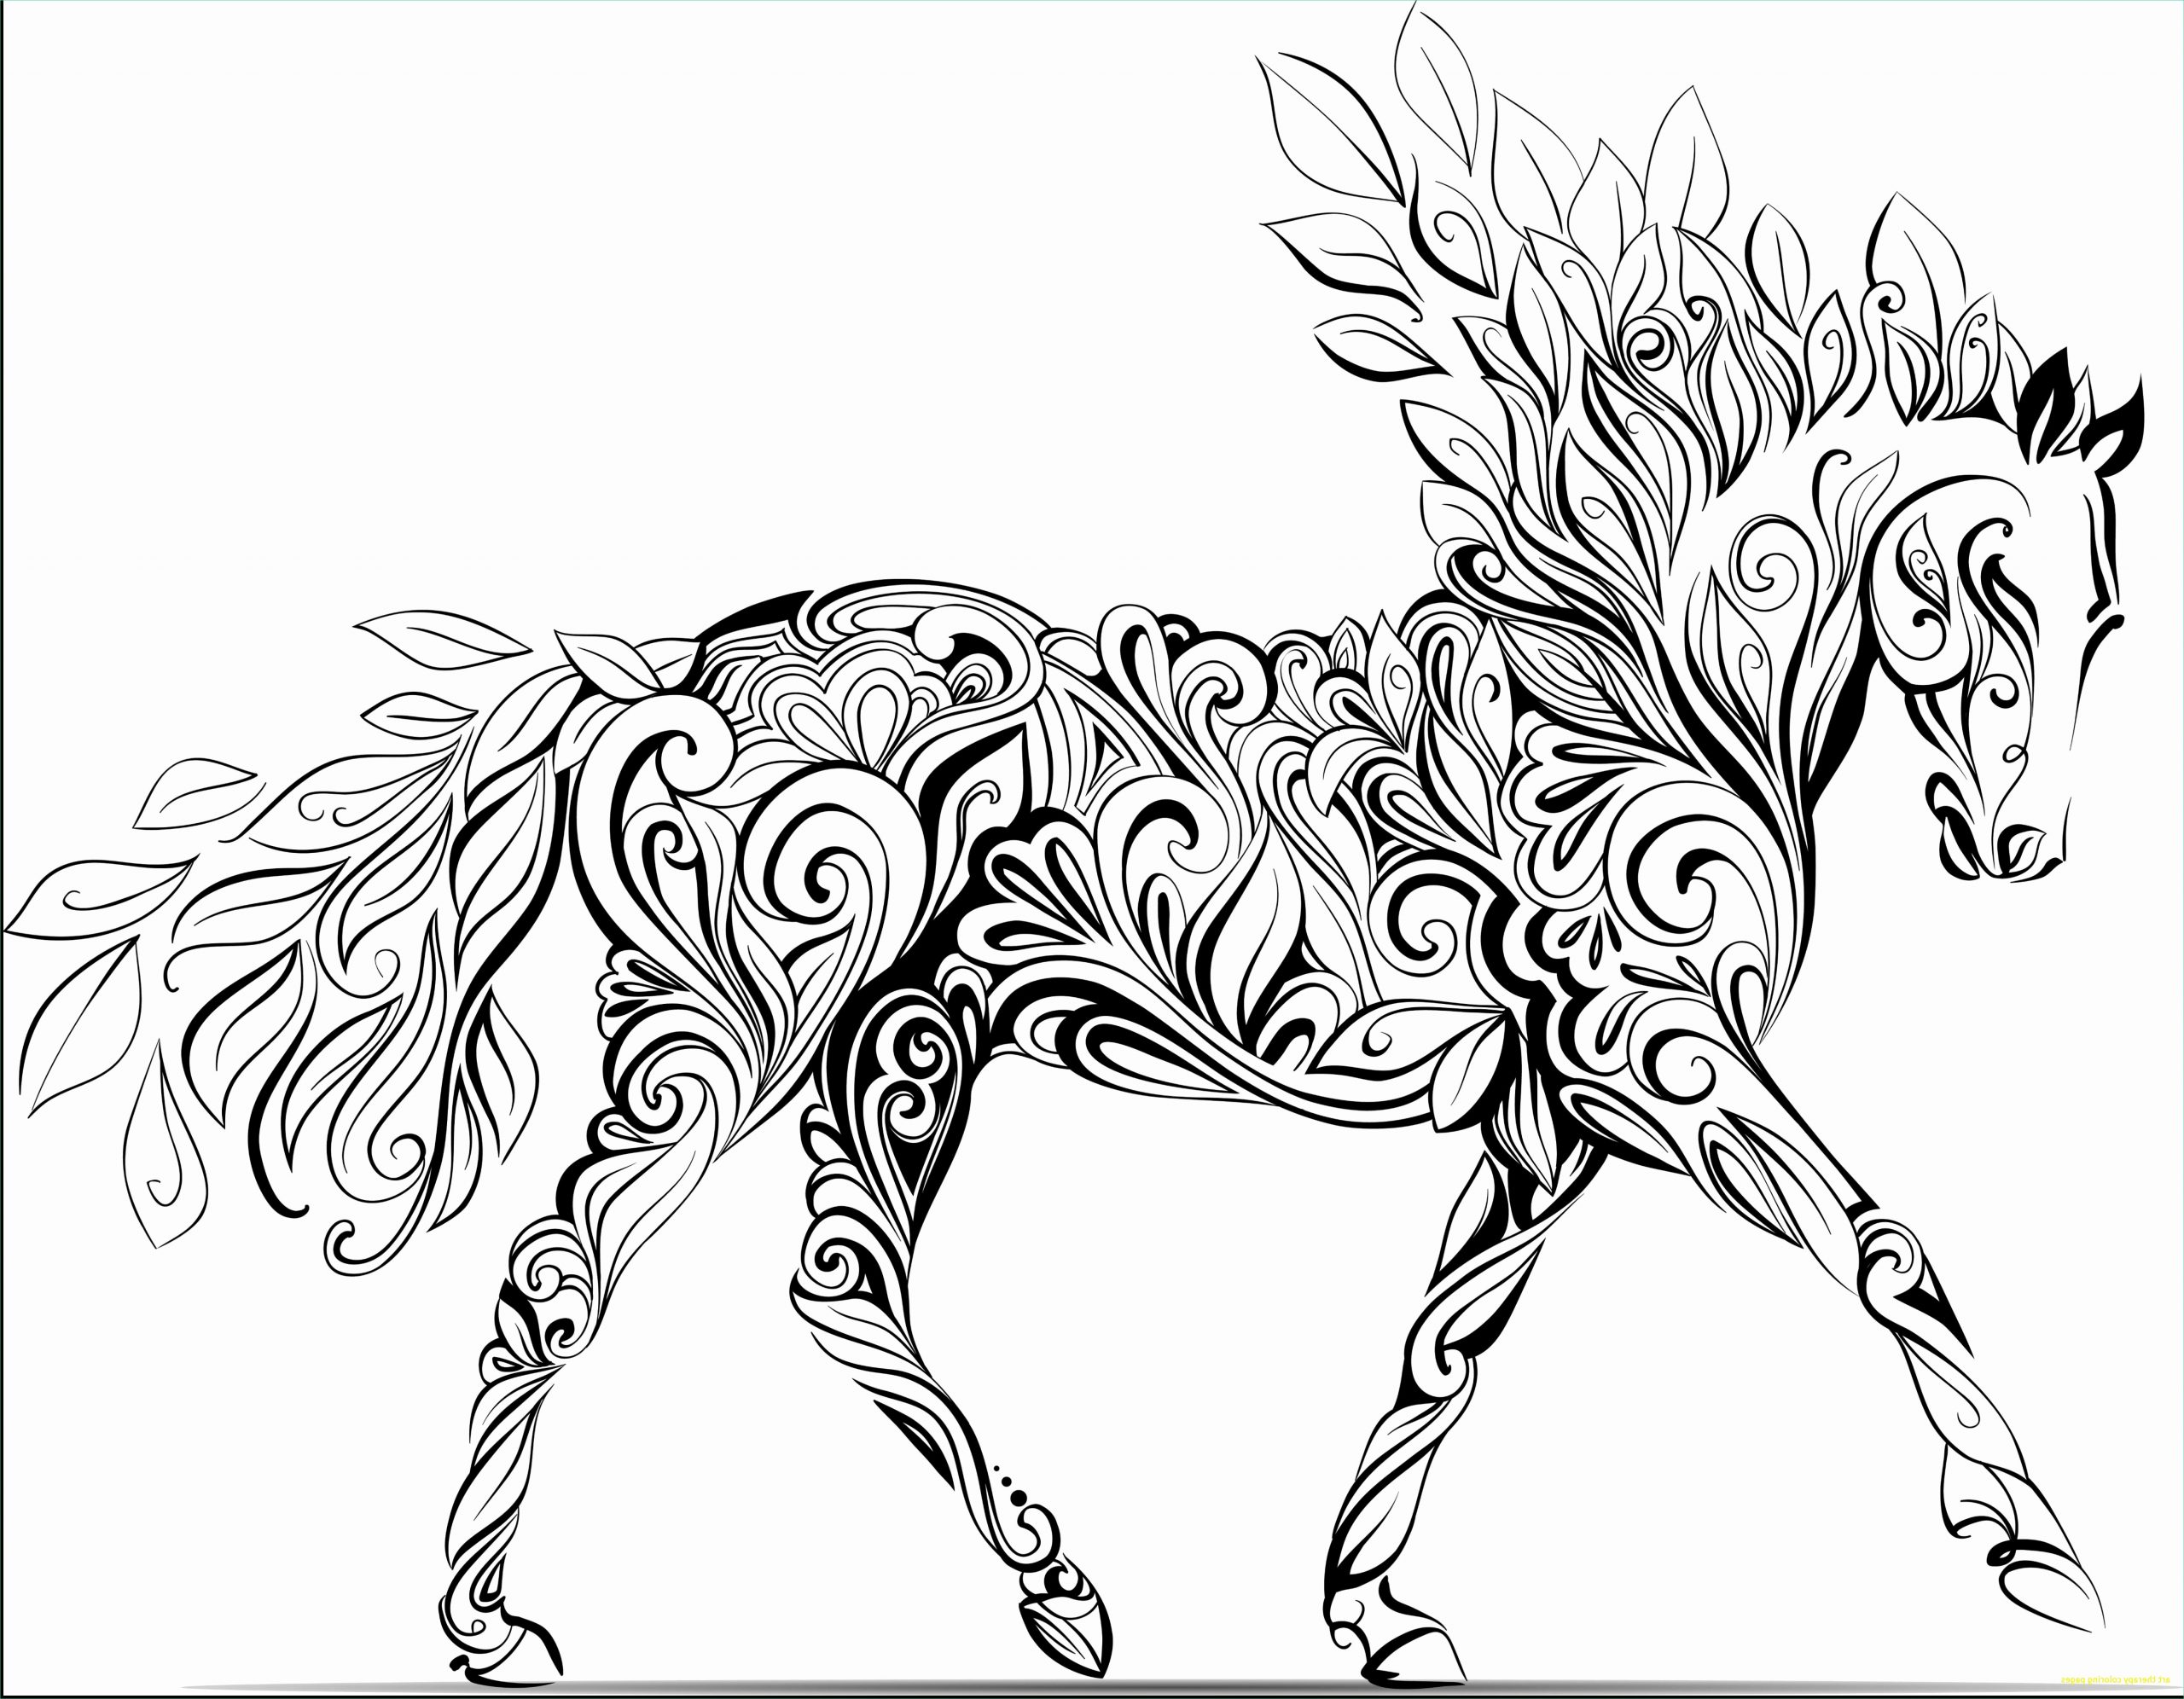 Coloriage Animal Unique Image Printable therapeutic Coloring Pages at Getcolorings